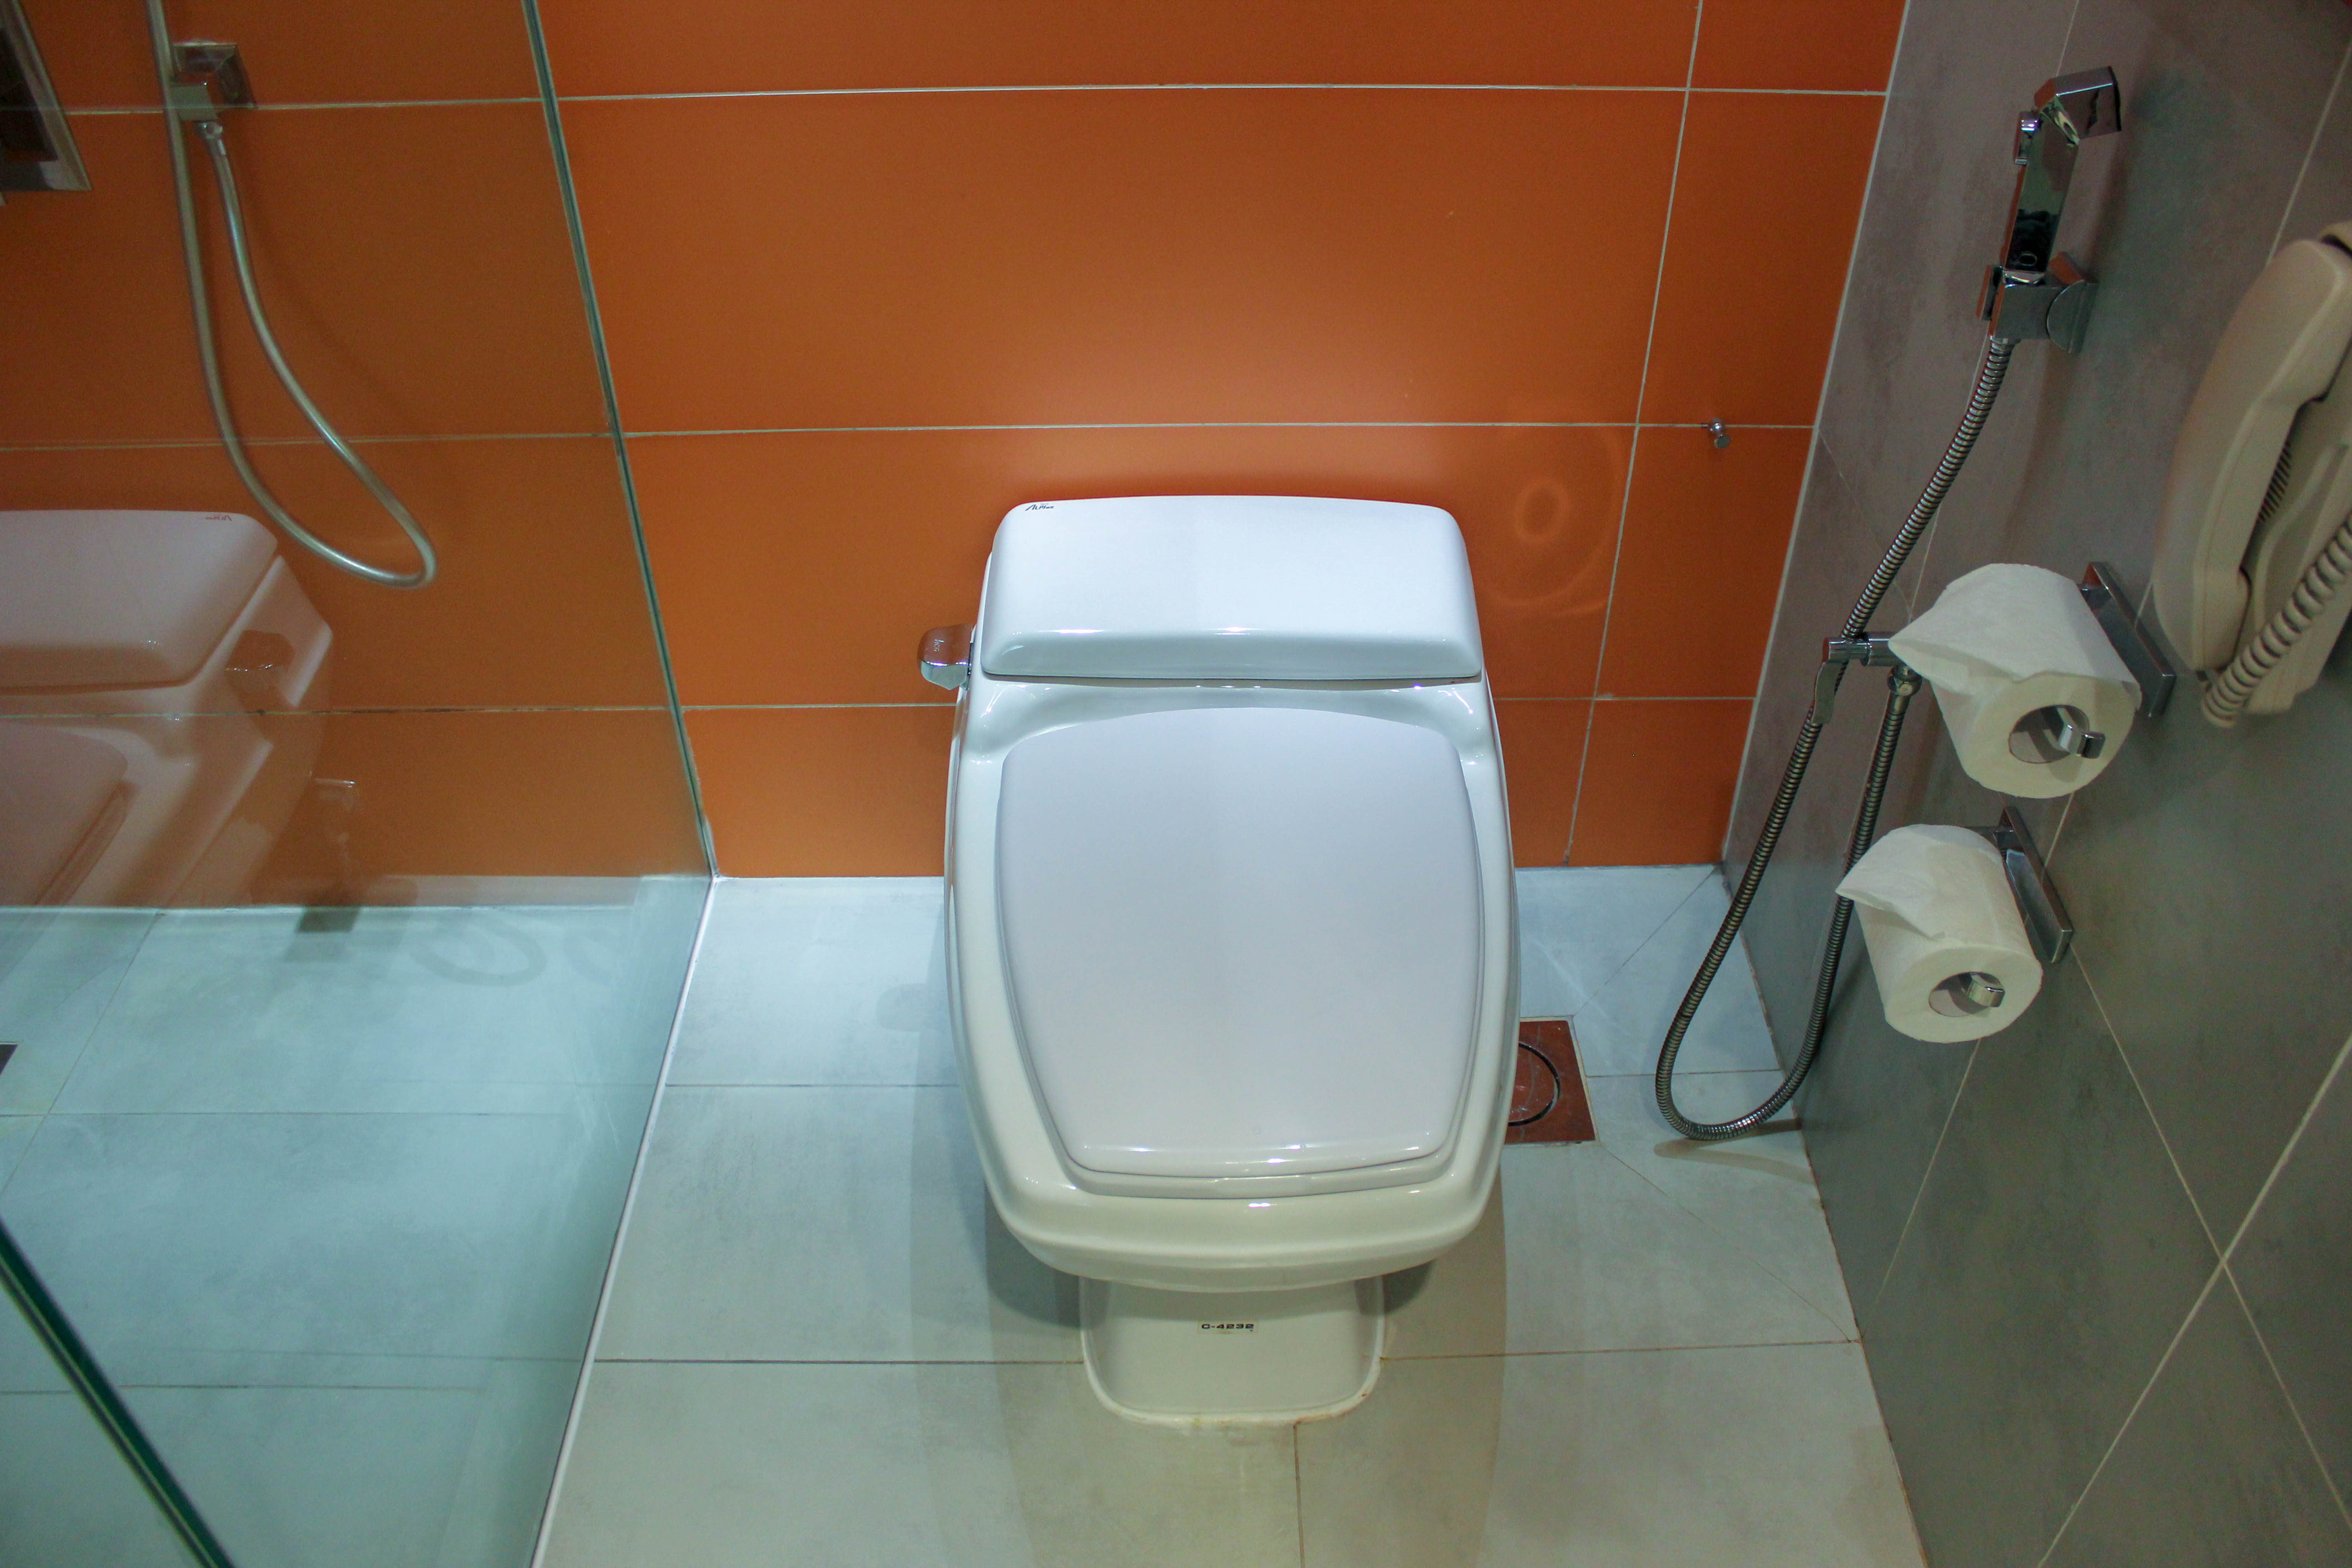 Toilet with nearby telephone for convenience